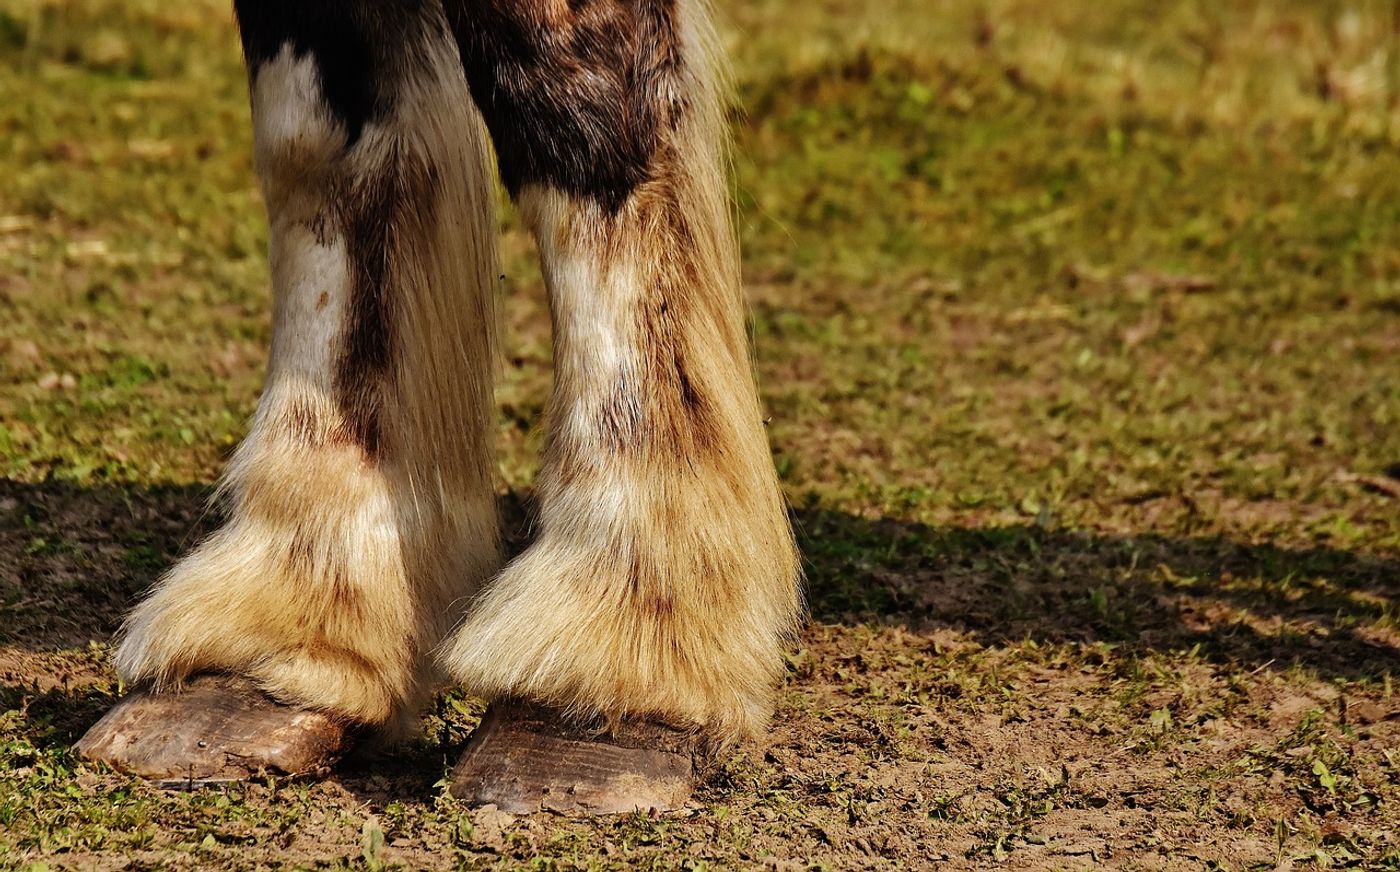 Horses have hooves today, but they might have had up to 5 toes per foot back in the day.